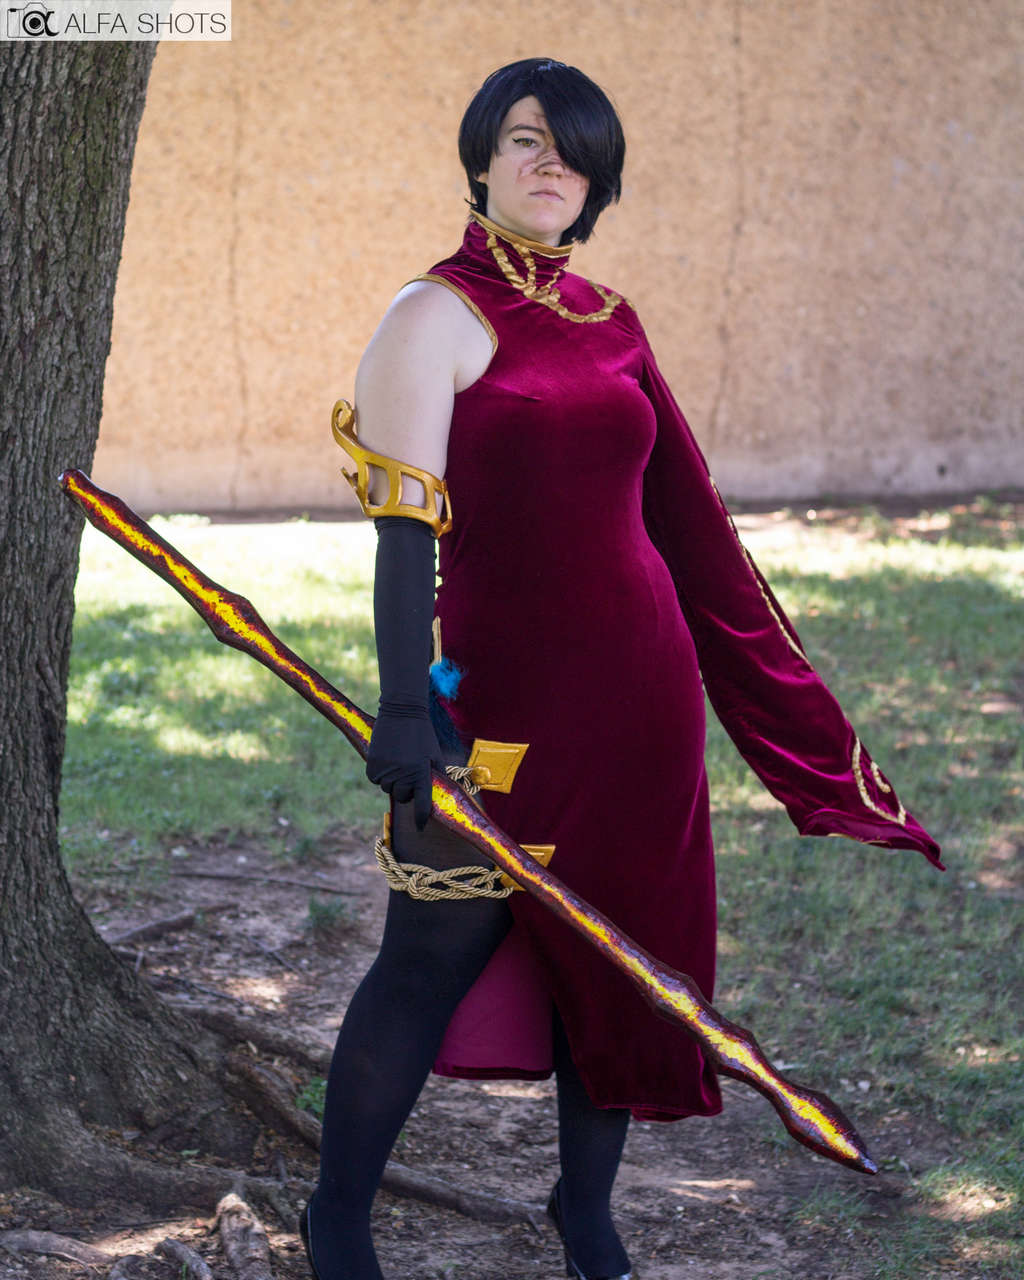 My Cinder Cosplay From A Kon 29 Photographer Alfashots956 On Instagra